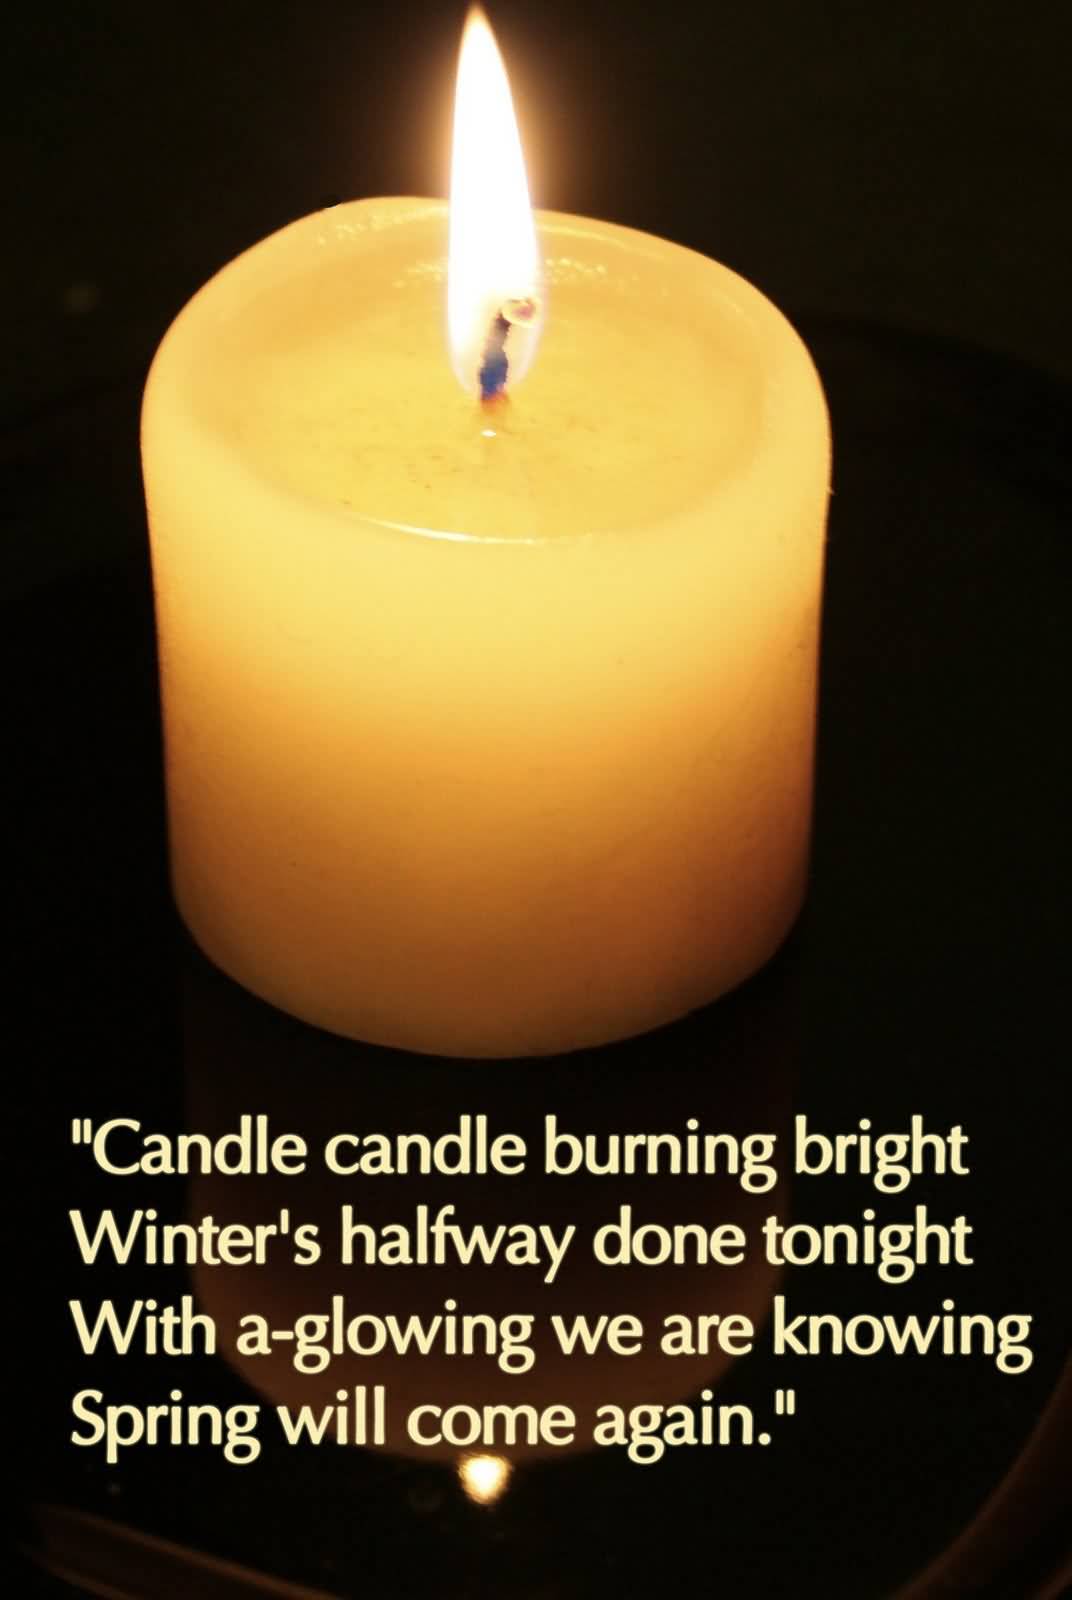 Candle Candle Burning Bright Winter's Halfway Done Tonight With A Glowing We Are Knowing Spring Will Come Again